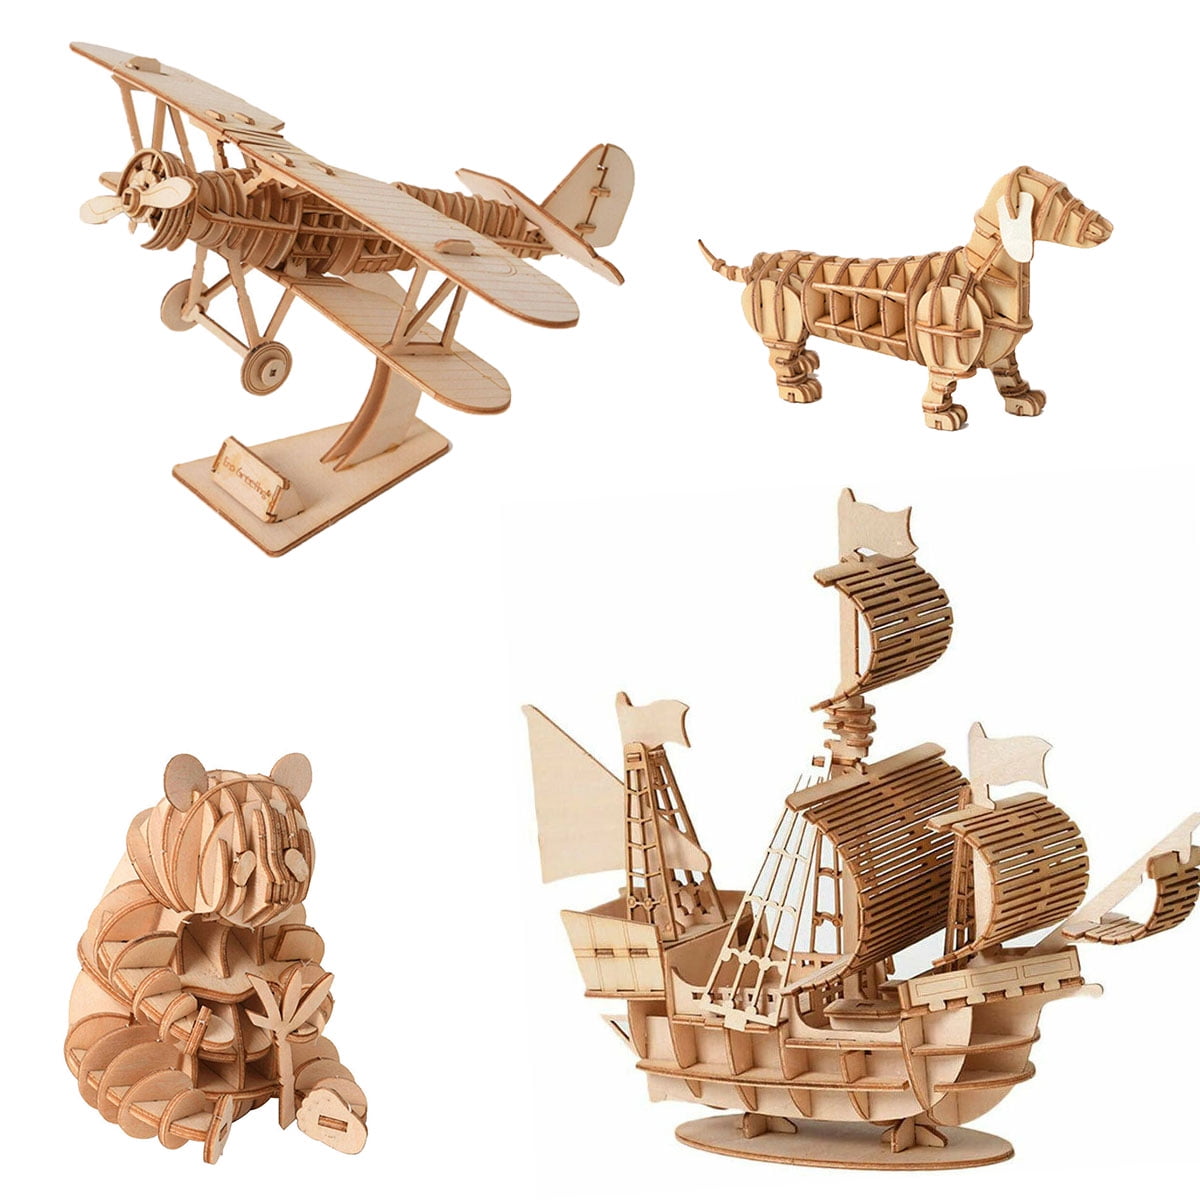 Details about    Sailing Ship Toys 3D Wooden Puzzle Toy Assembly Model Kids  Educational Gift 